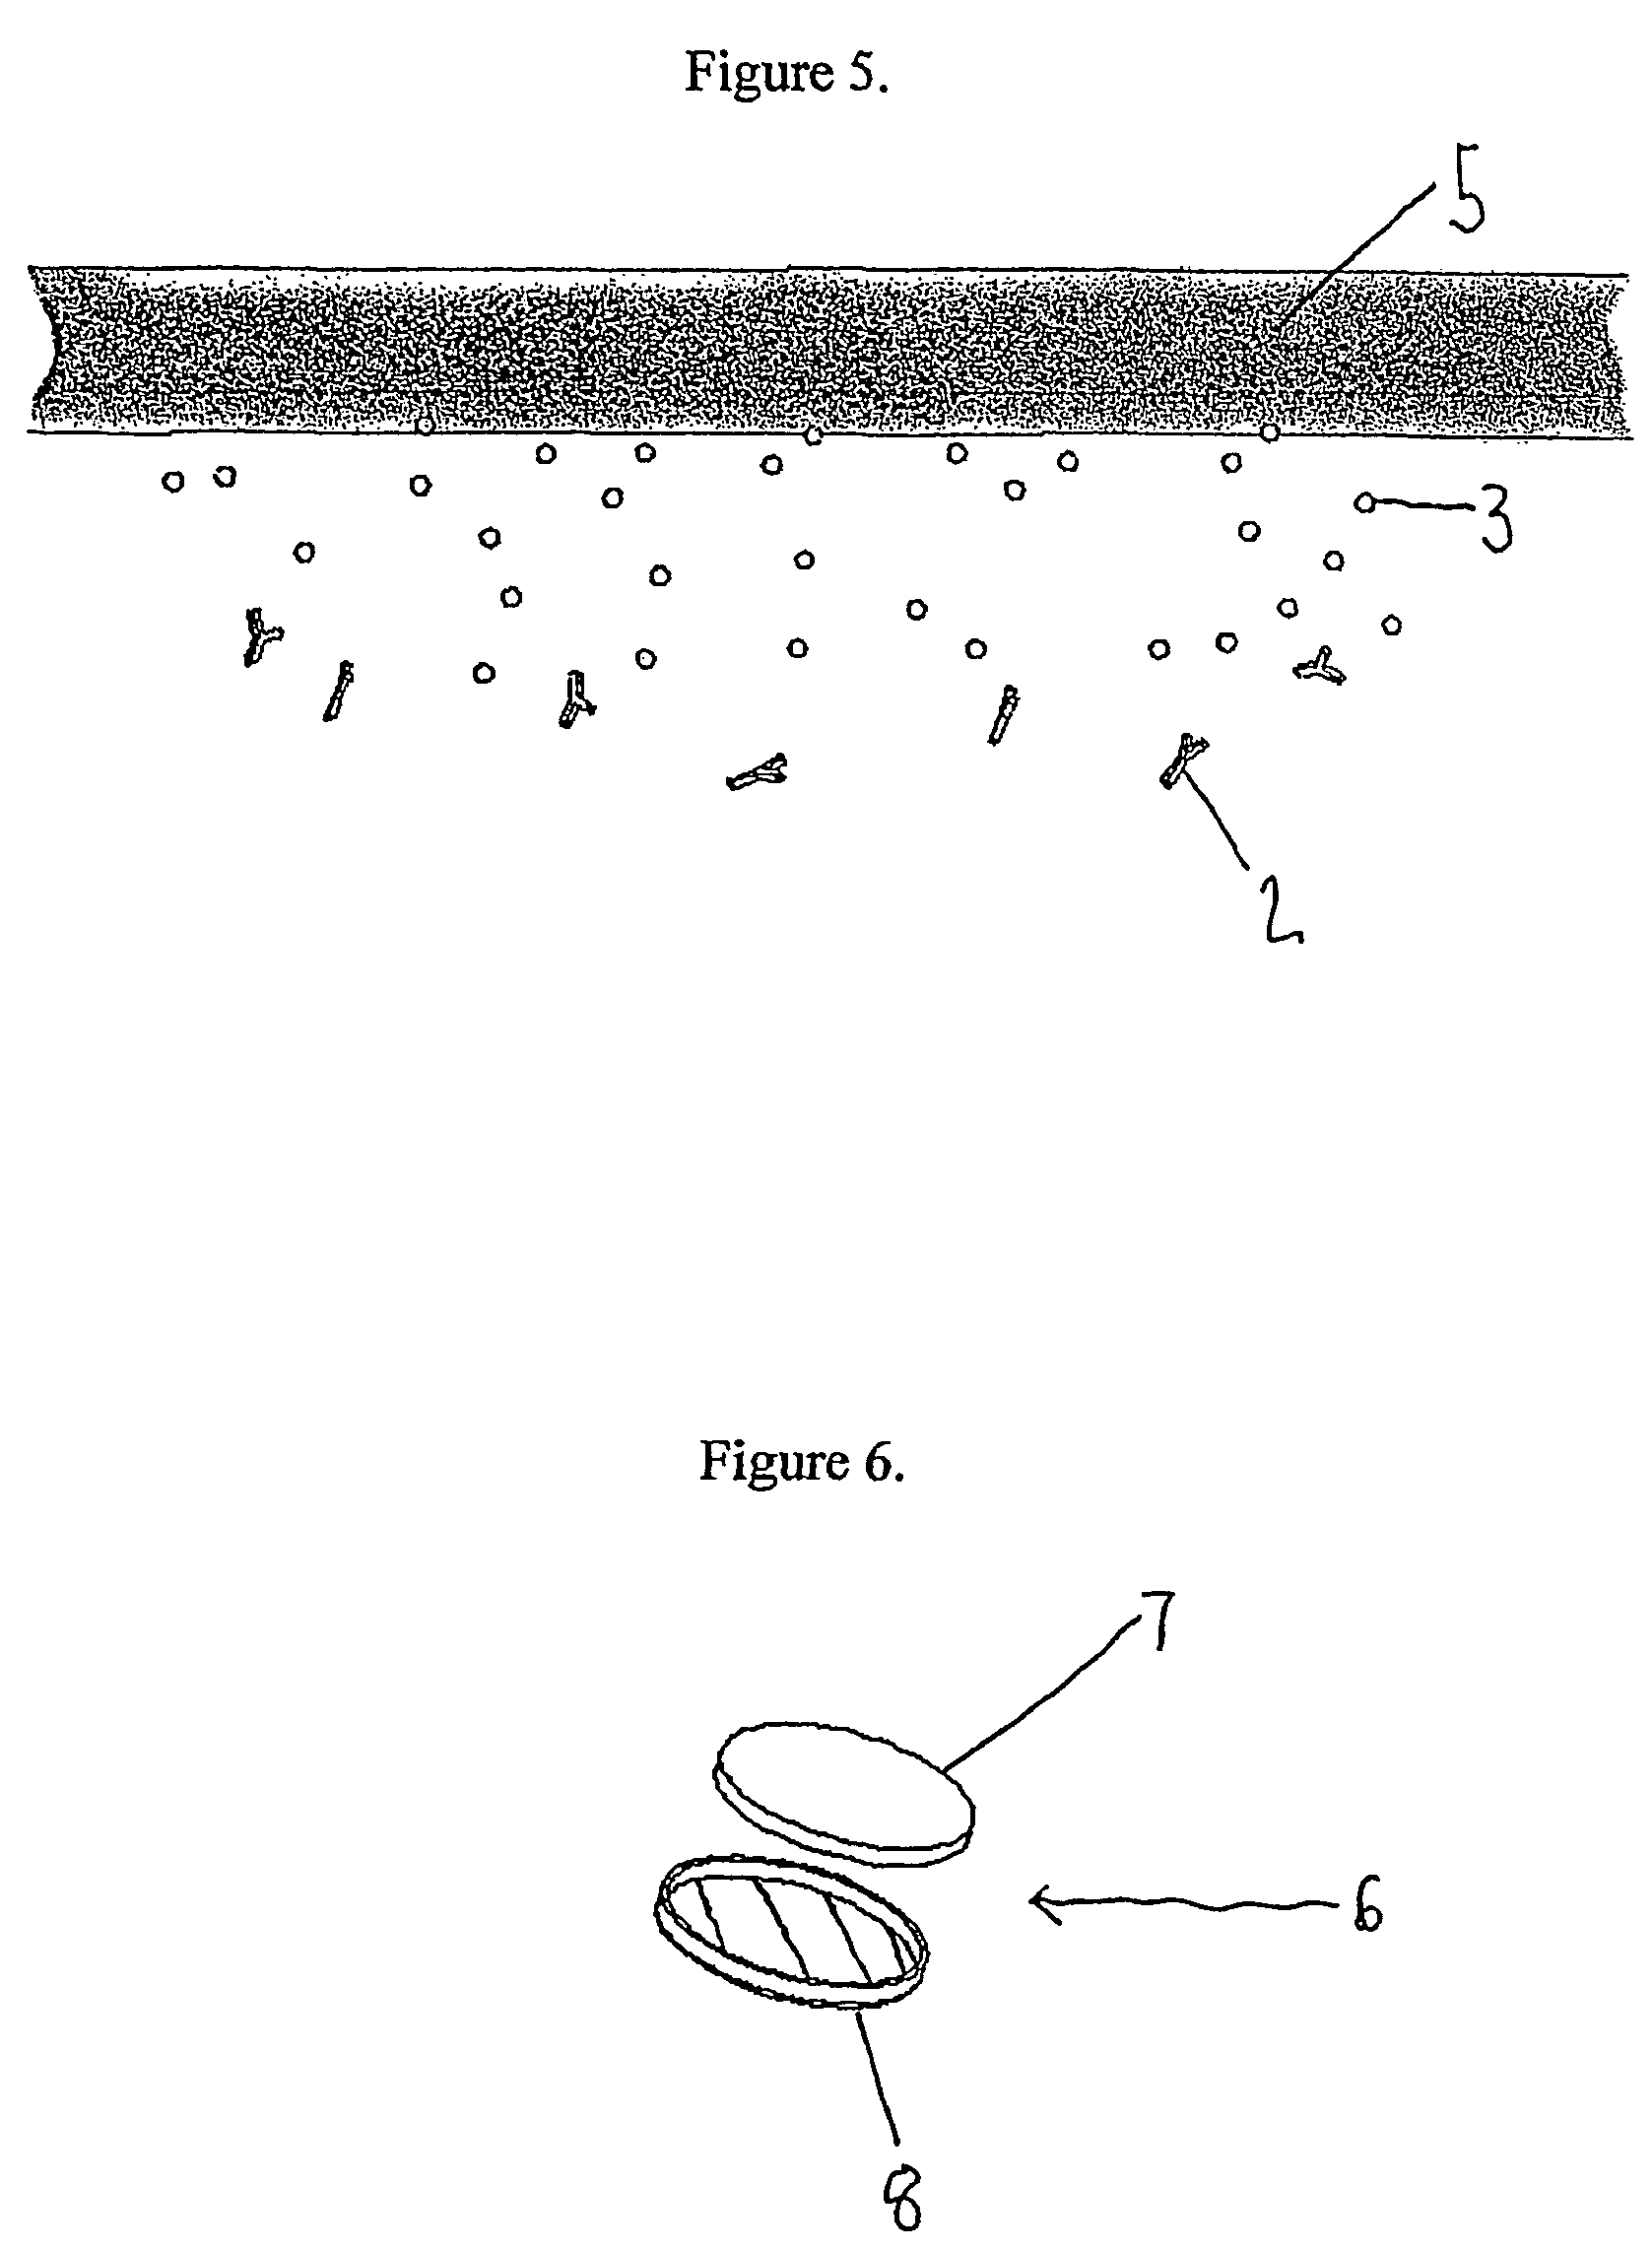 Indicator for in-situ detecting of lysozyme